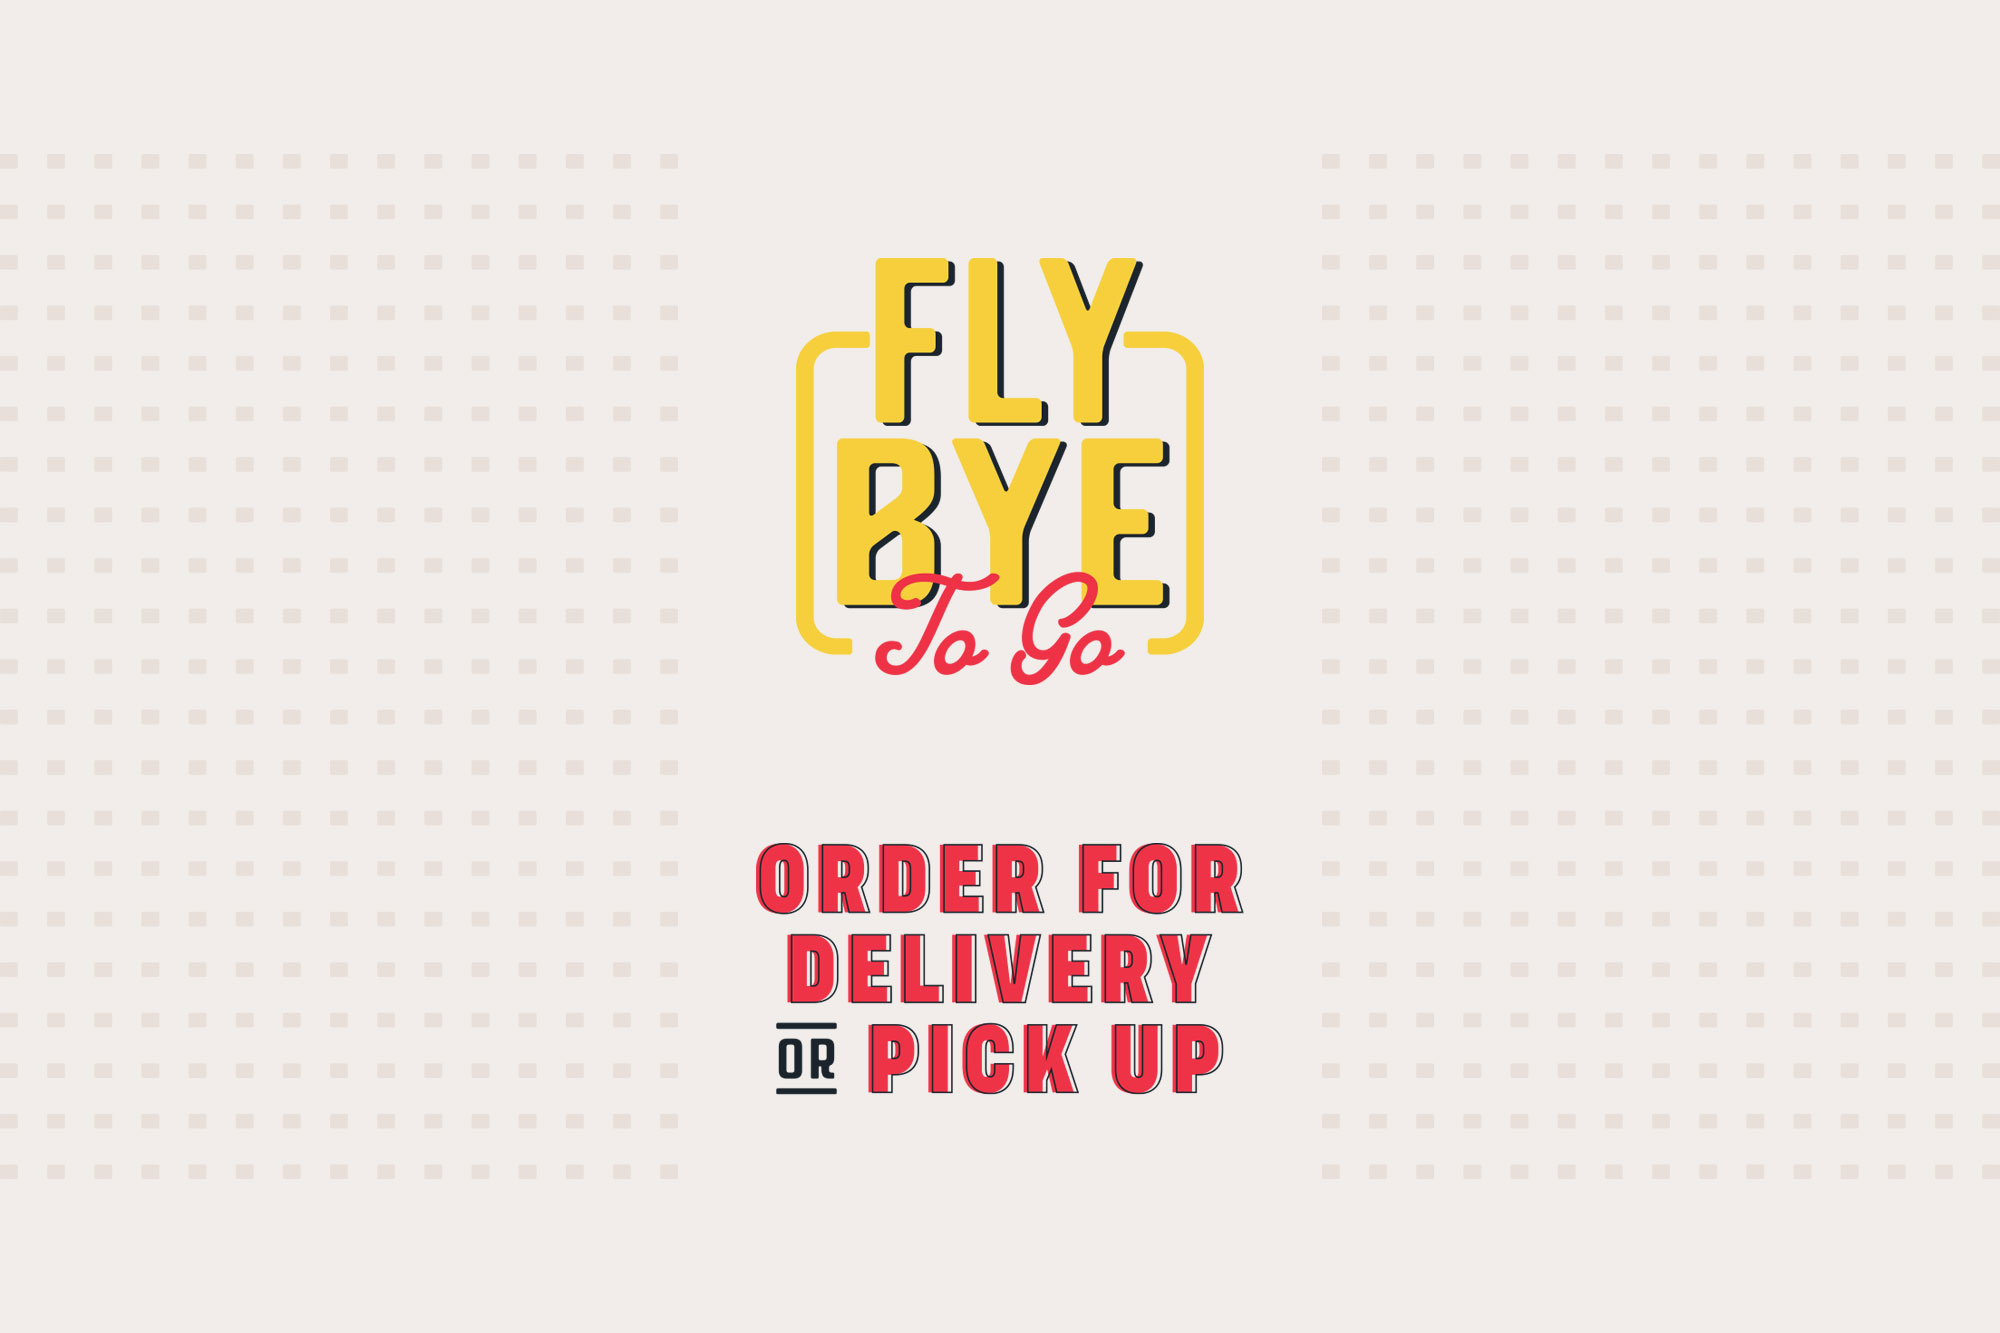 Fly Bye To Go - Square Pan Pizza & Crispy Chicken